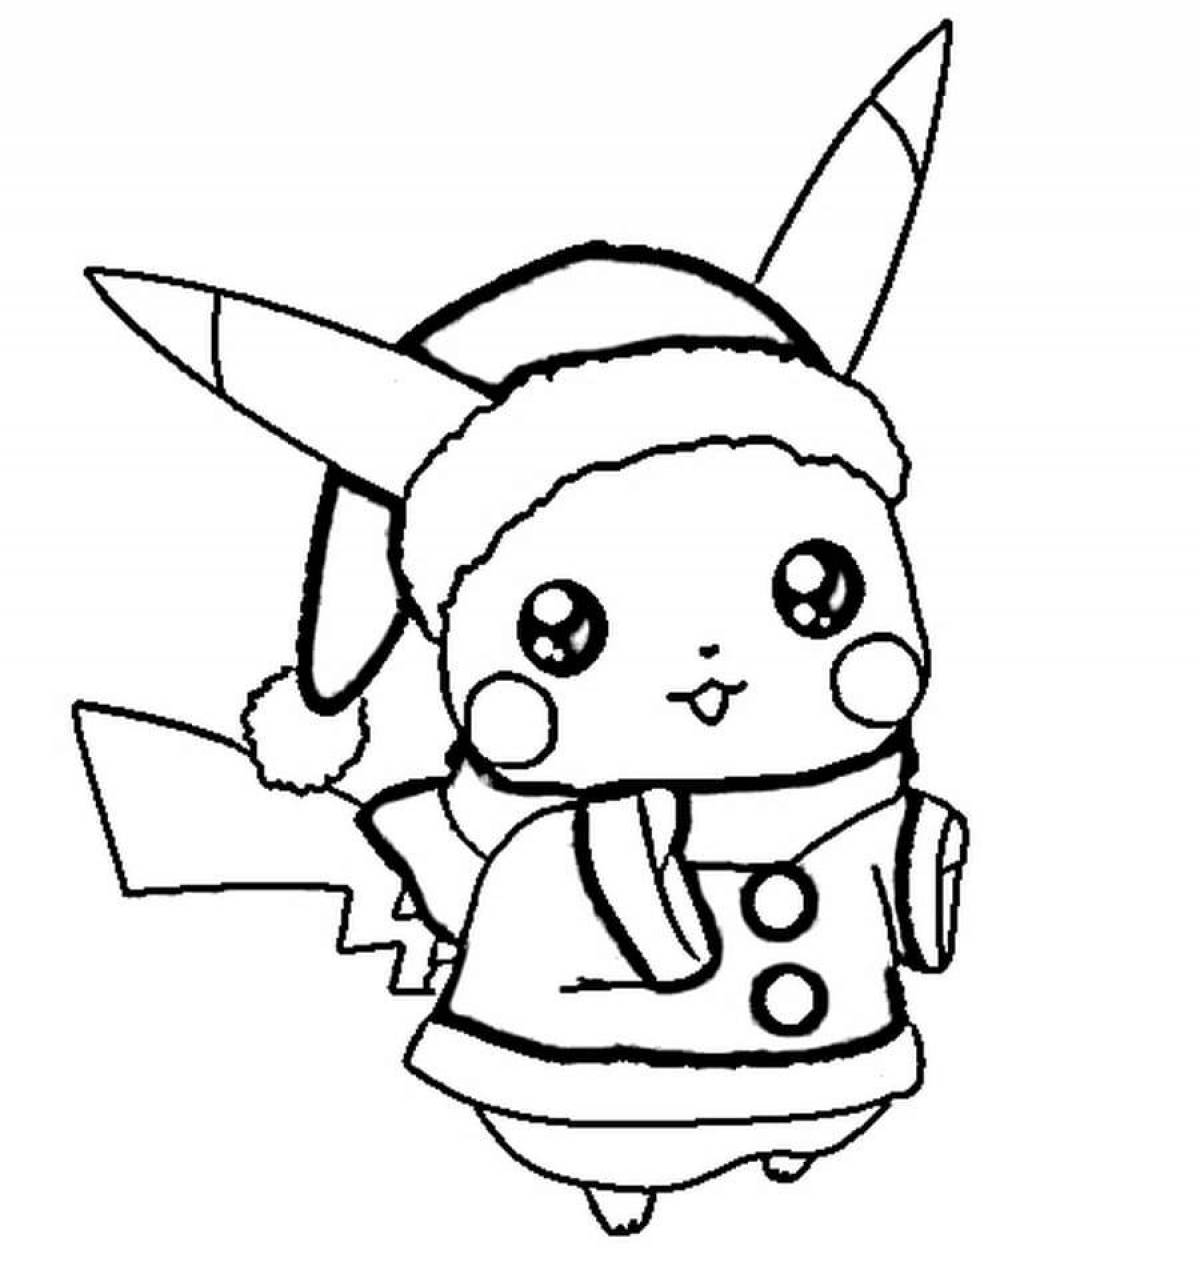 Happy pikachu coloring pages for kids